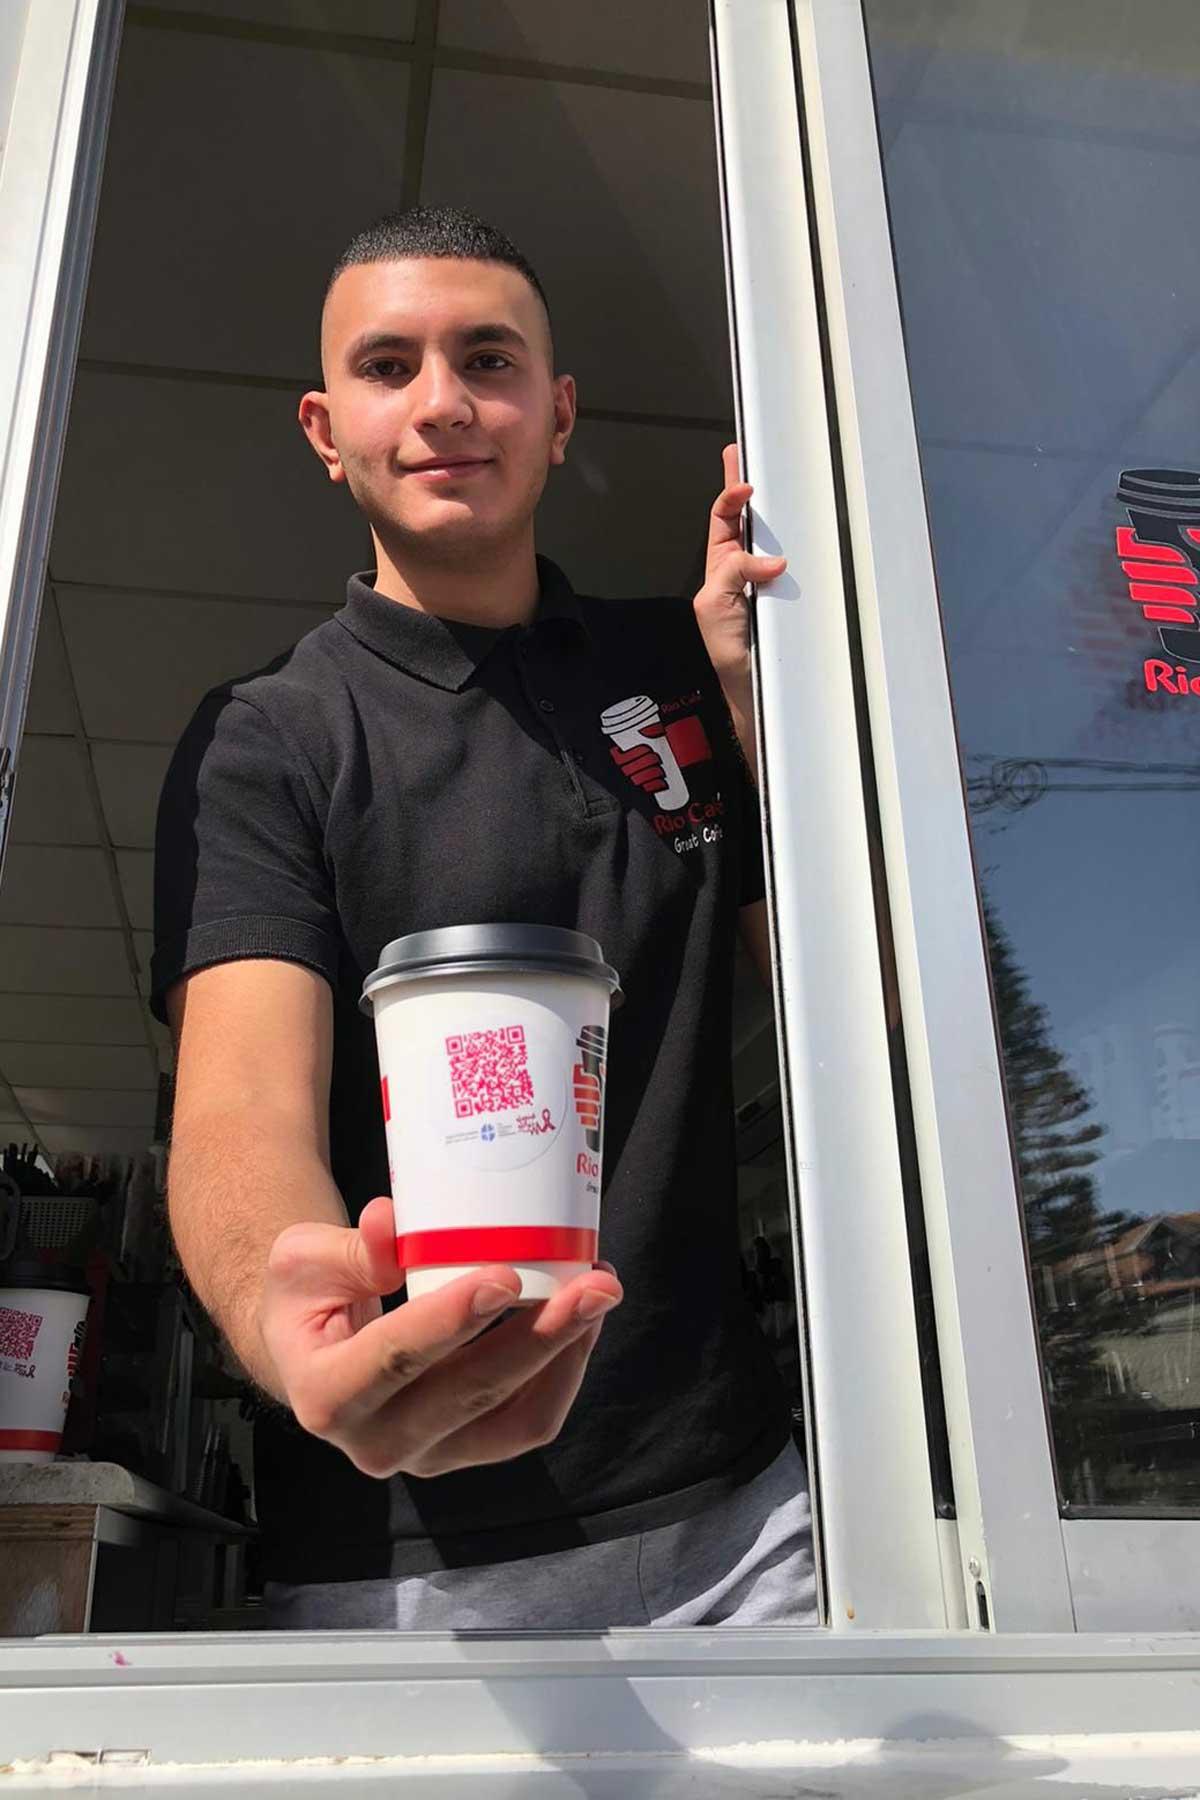 Rio Café, a popular coffee chain in Ramallah, is selling their brew in cups with a message on breast cancer this month. Photo: LWF/AVH